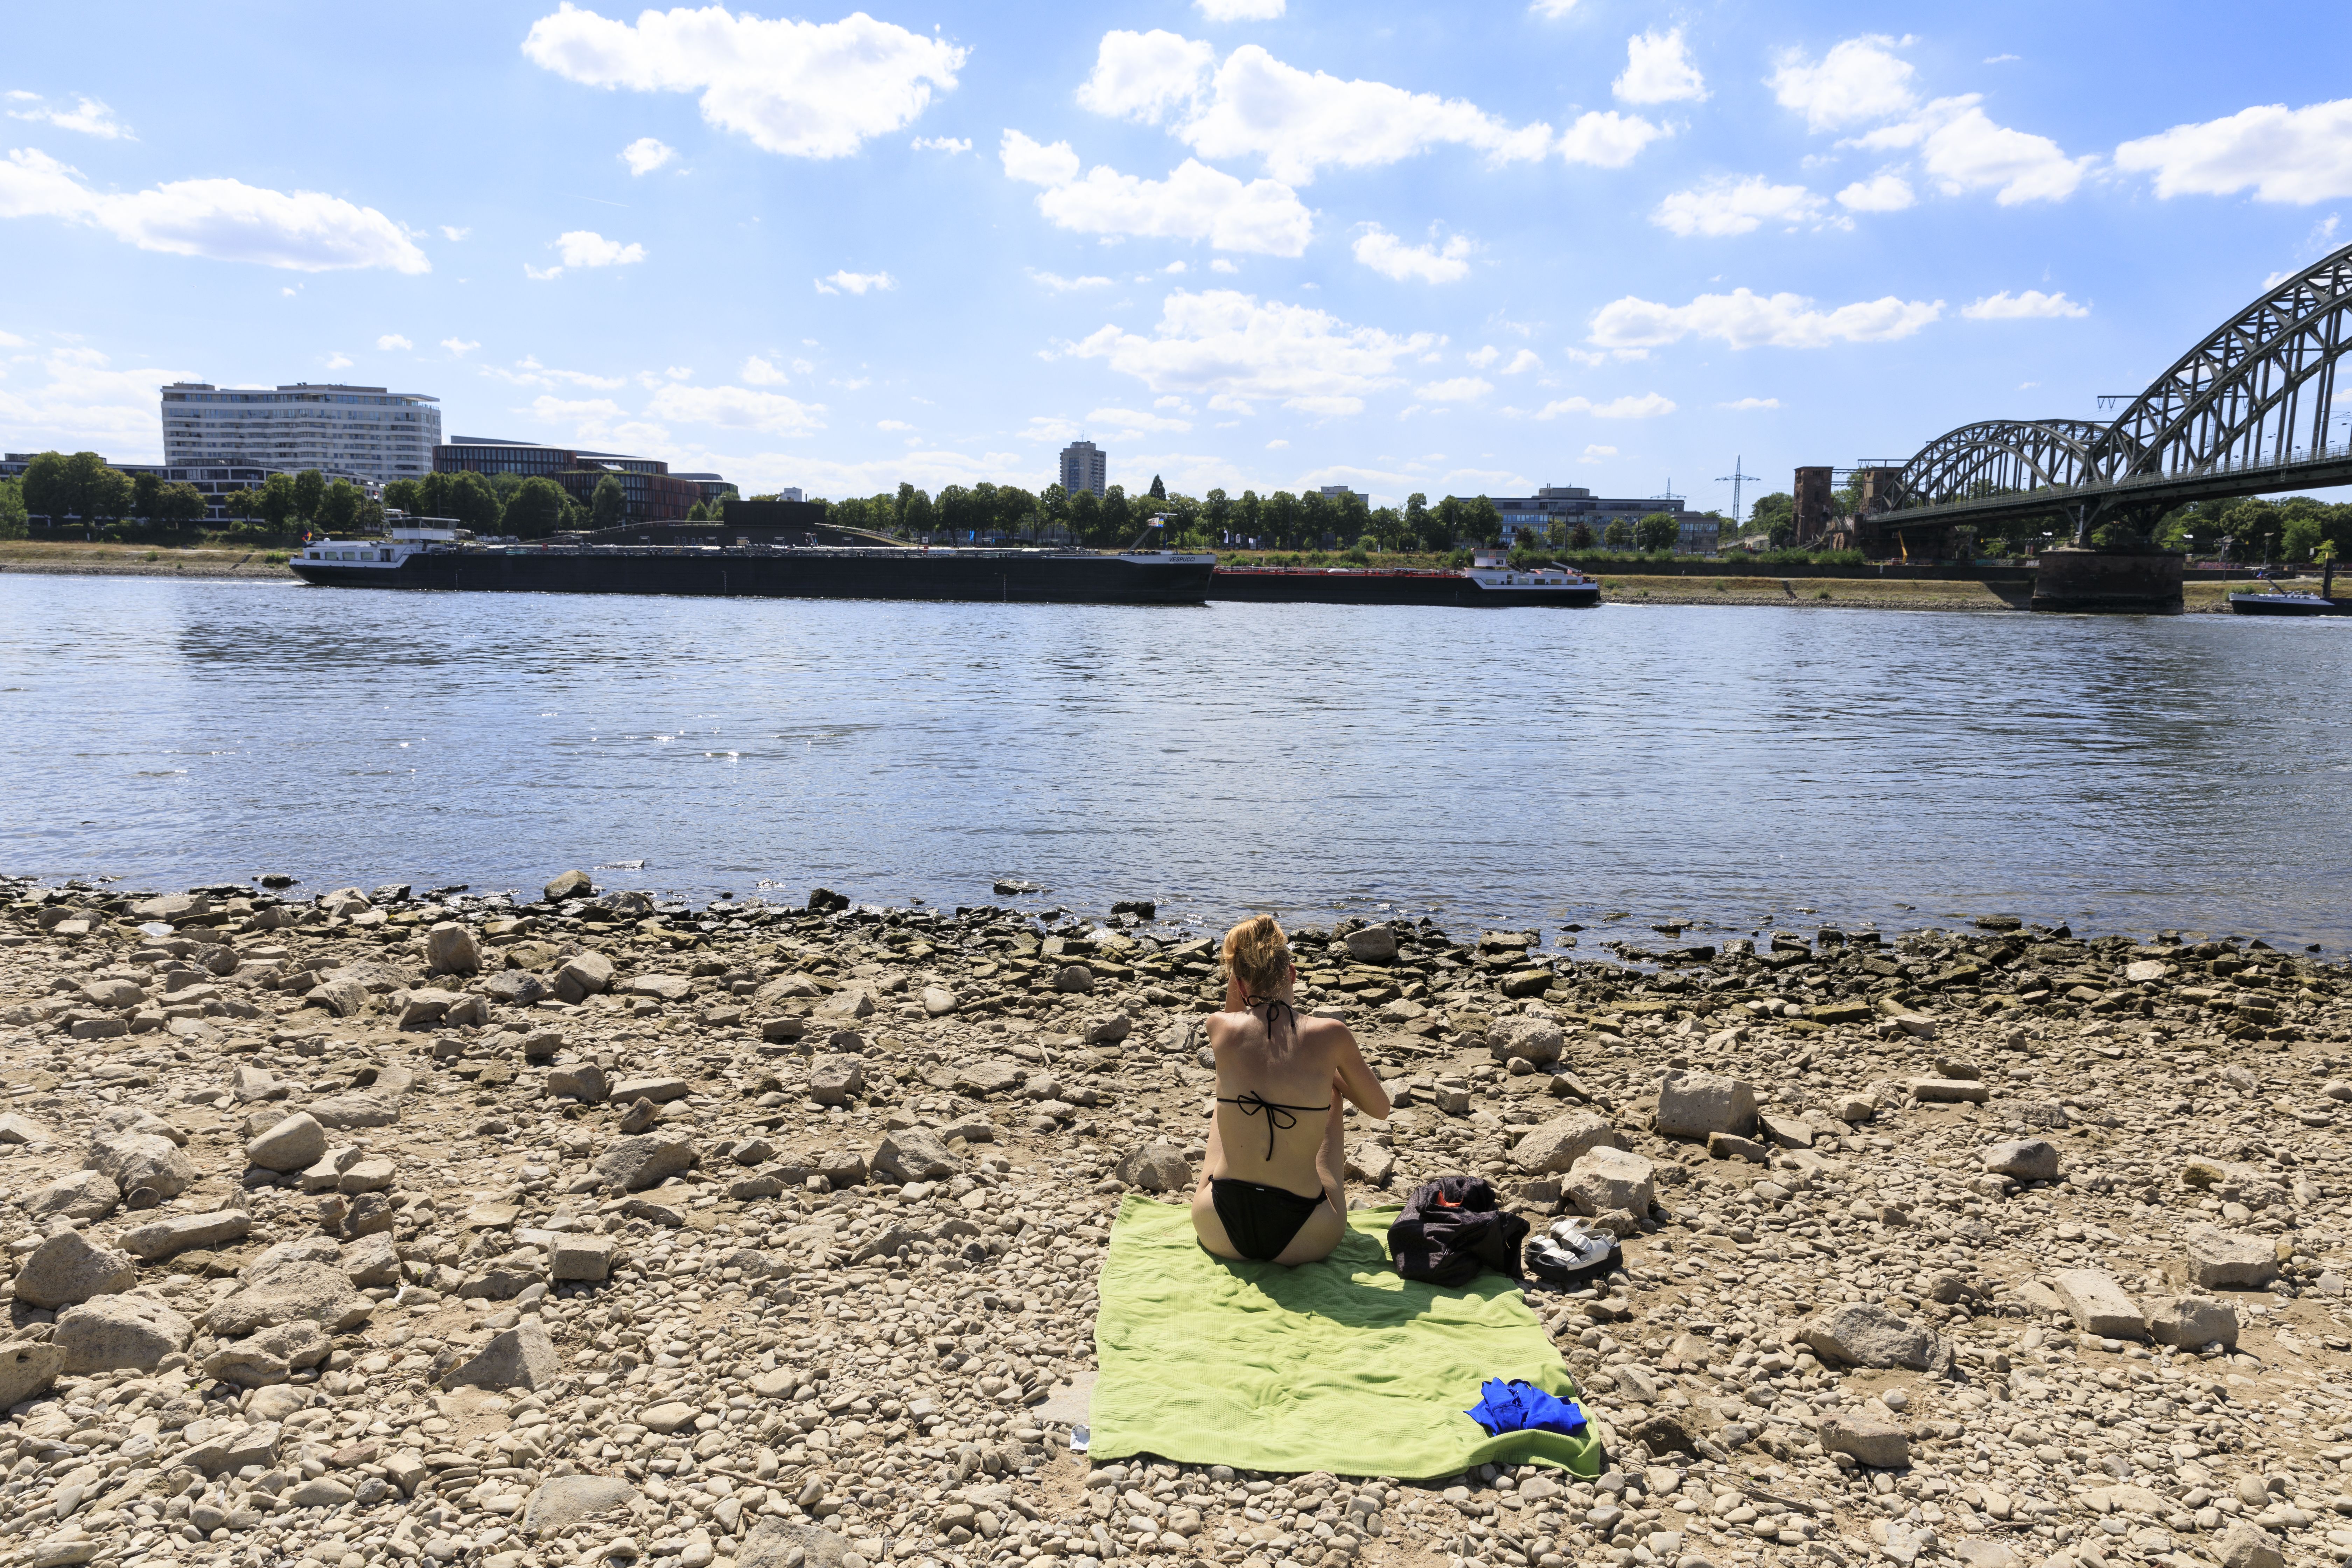 People sit on the dry banks of the Rhine River in Cologne, Germany on August 3, 2022. 